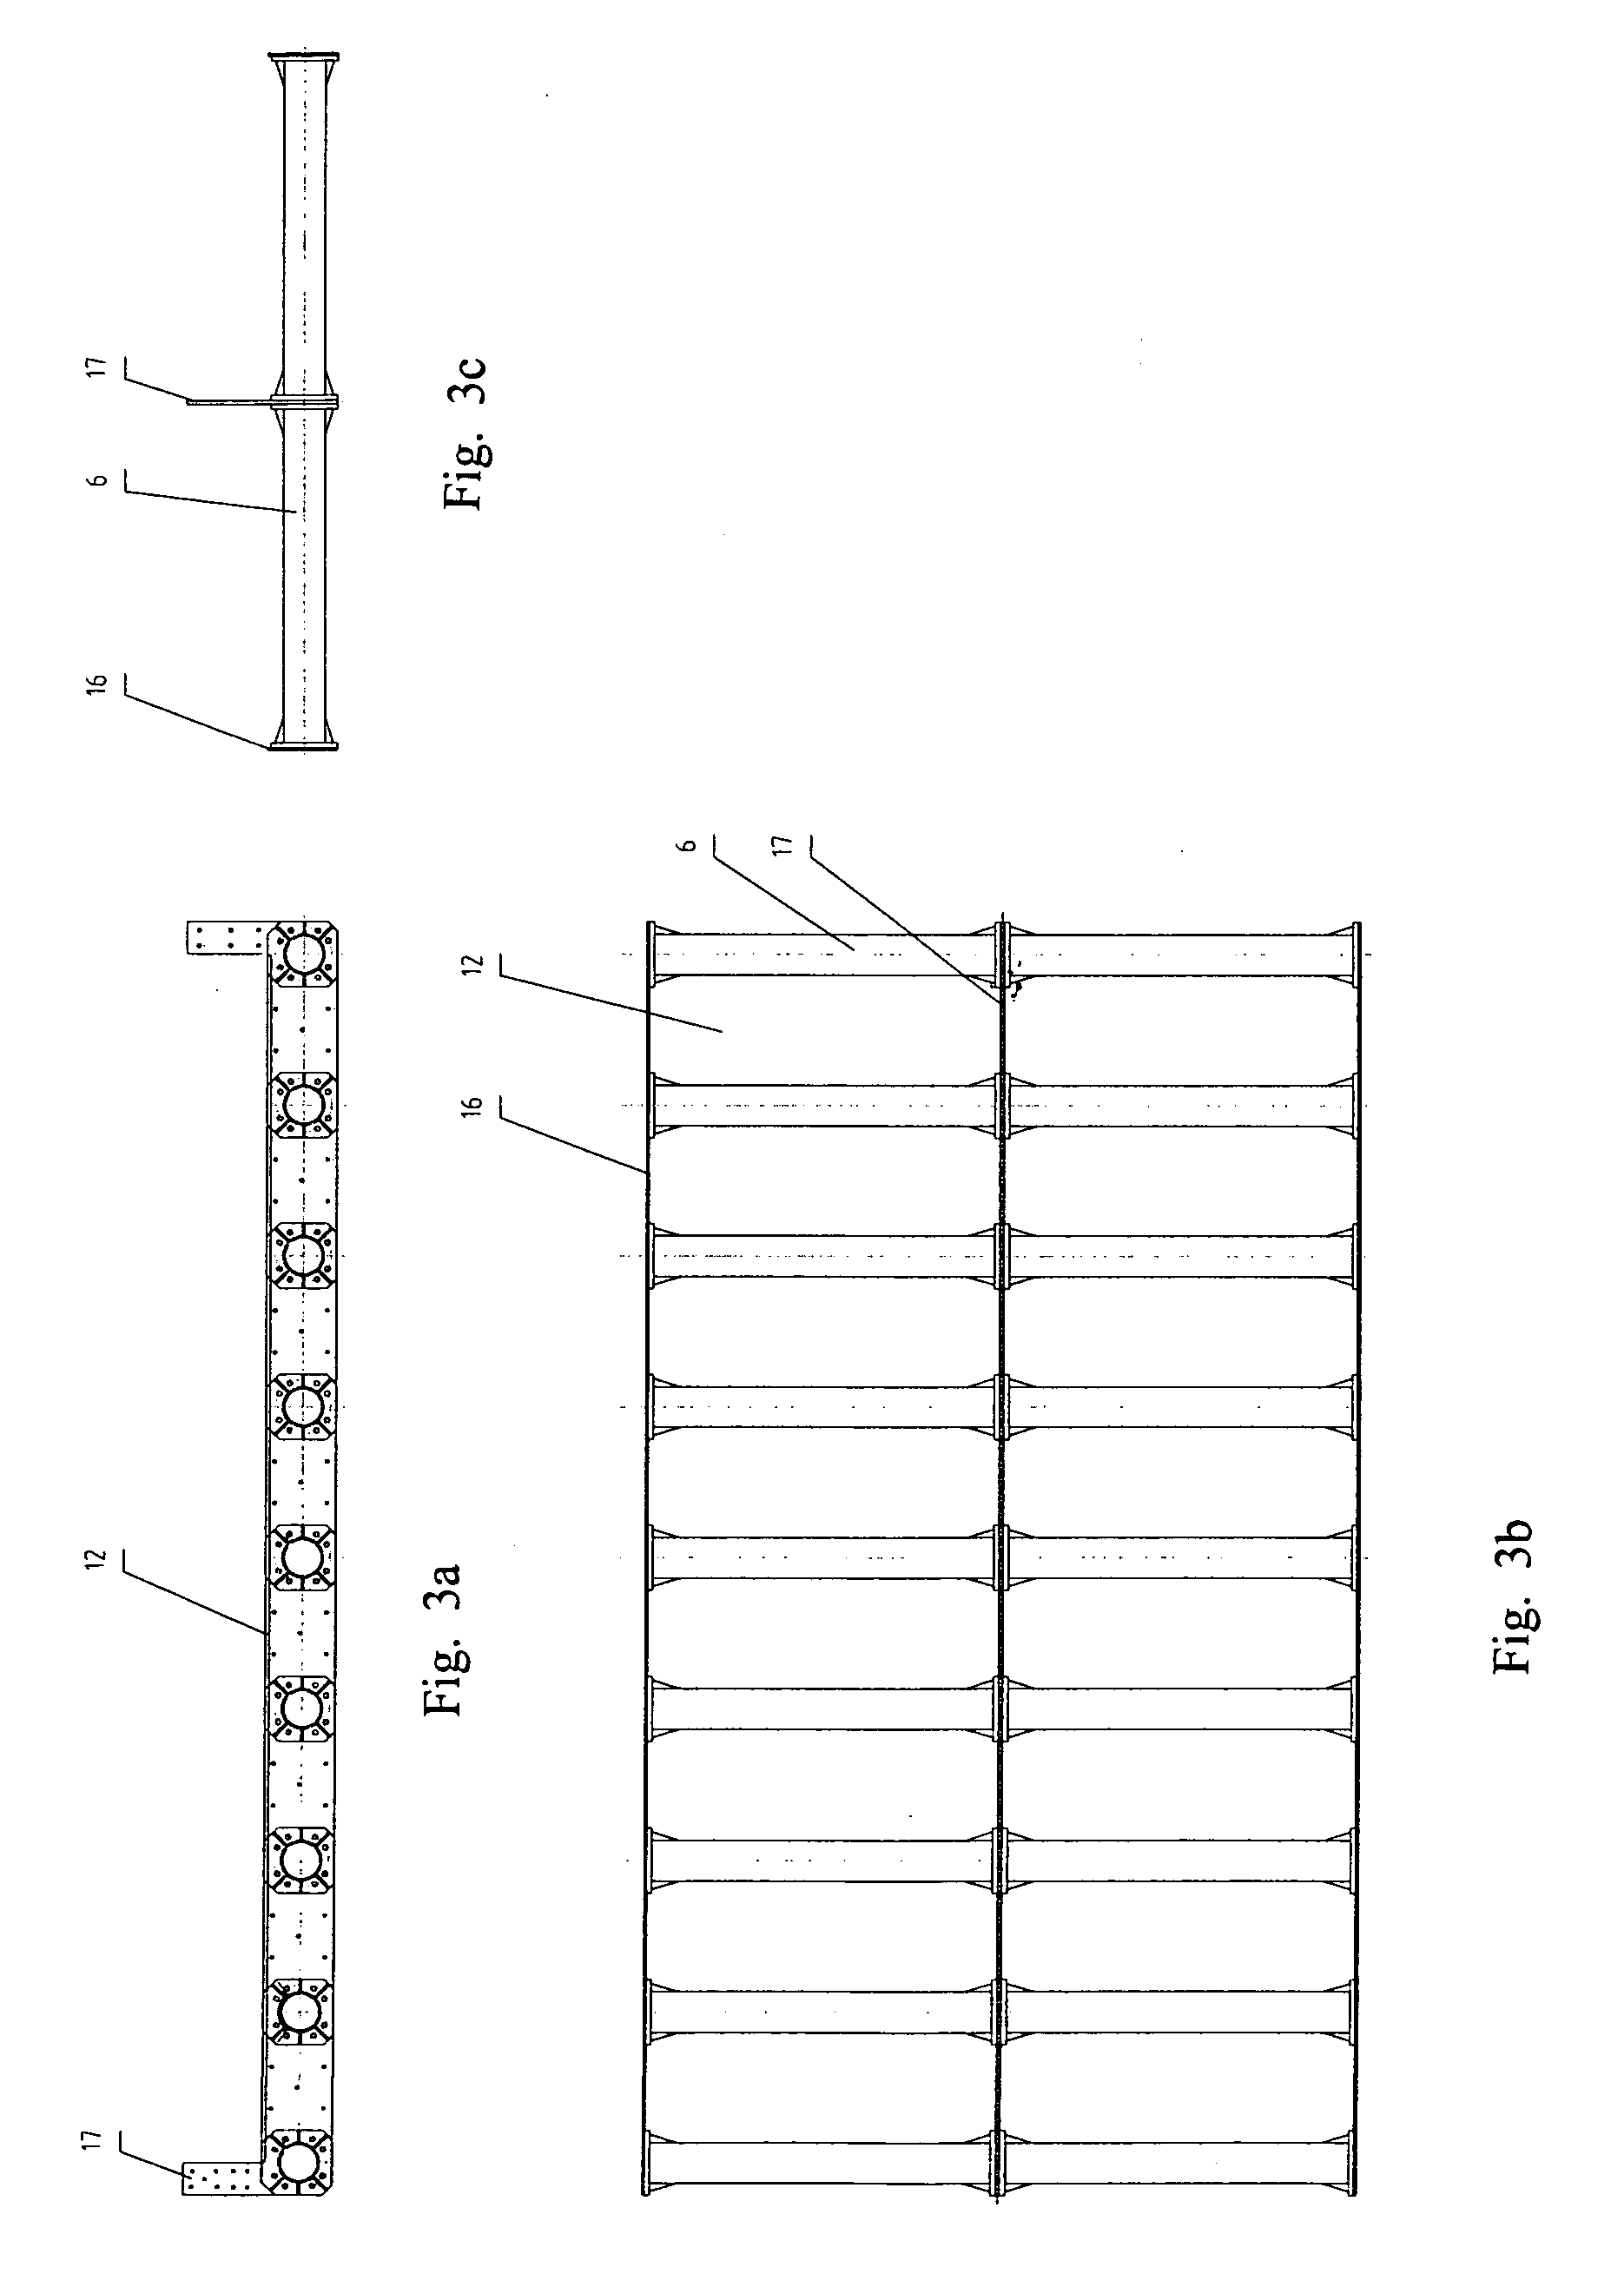 Extra-Large Vibrating Screen With Duplex Statically Indeterminate Mesh Beam